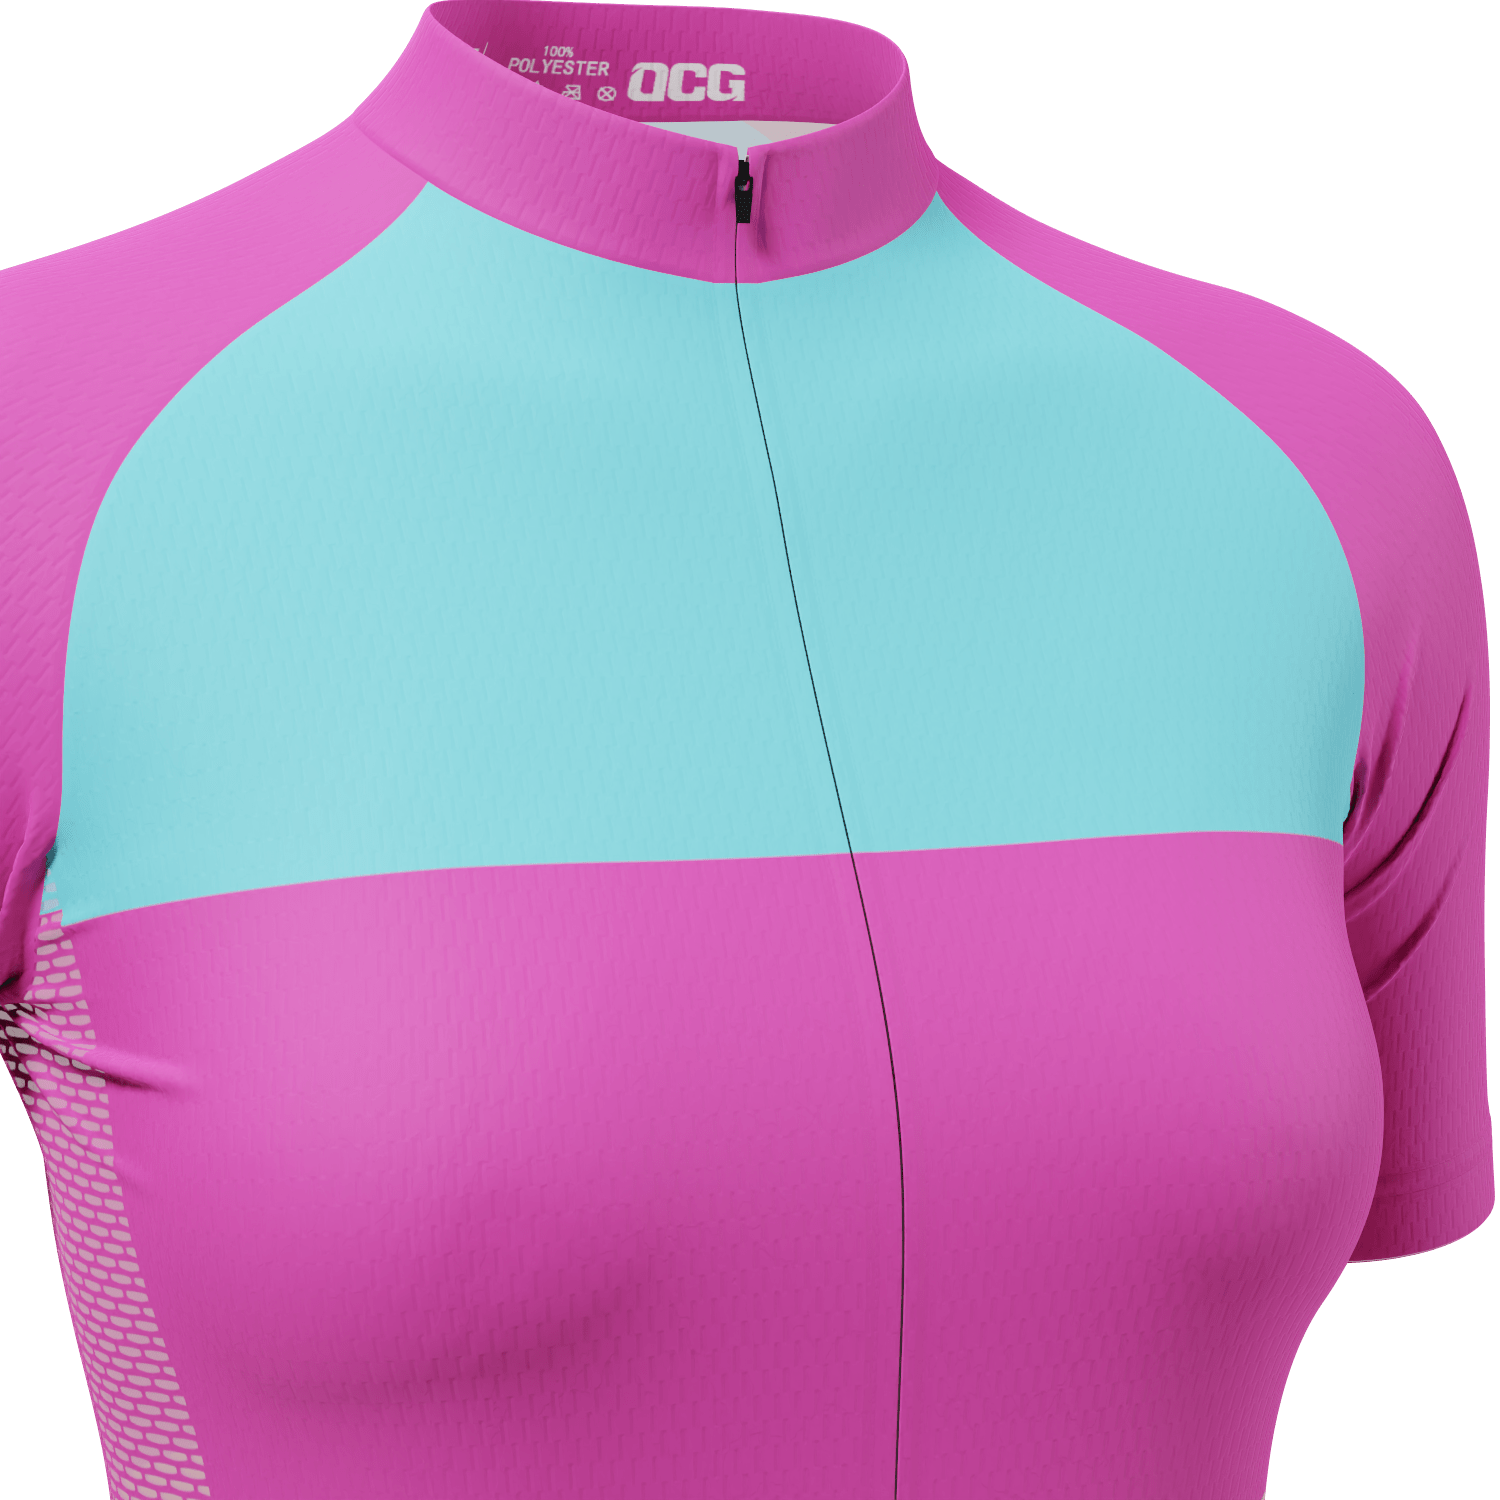 Women's Rainbow Candy Striped Short Sleeve Cycling Jersey